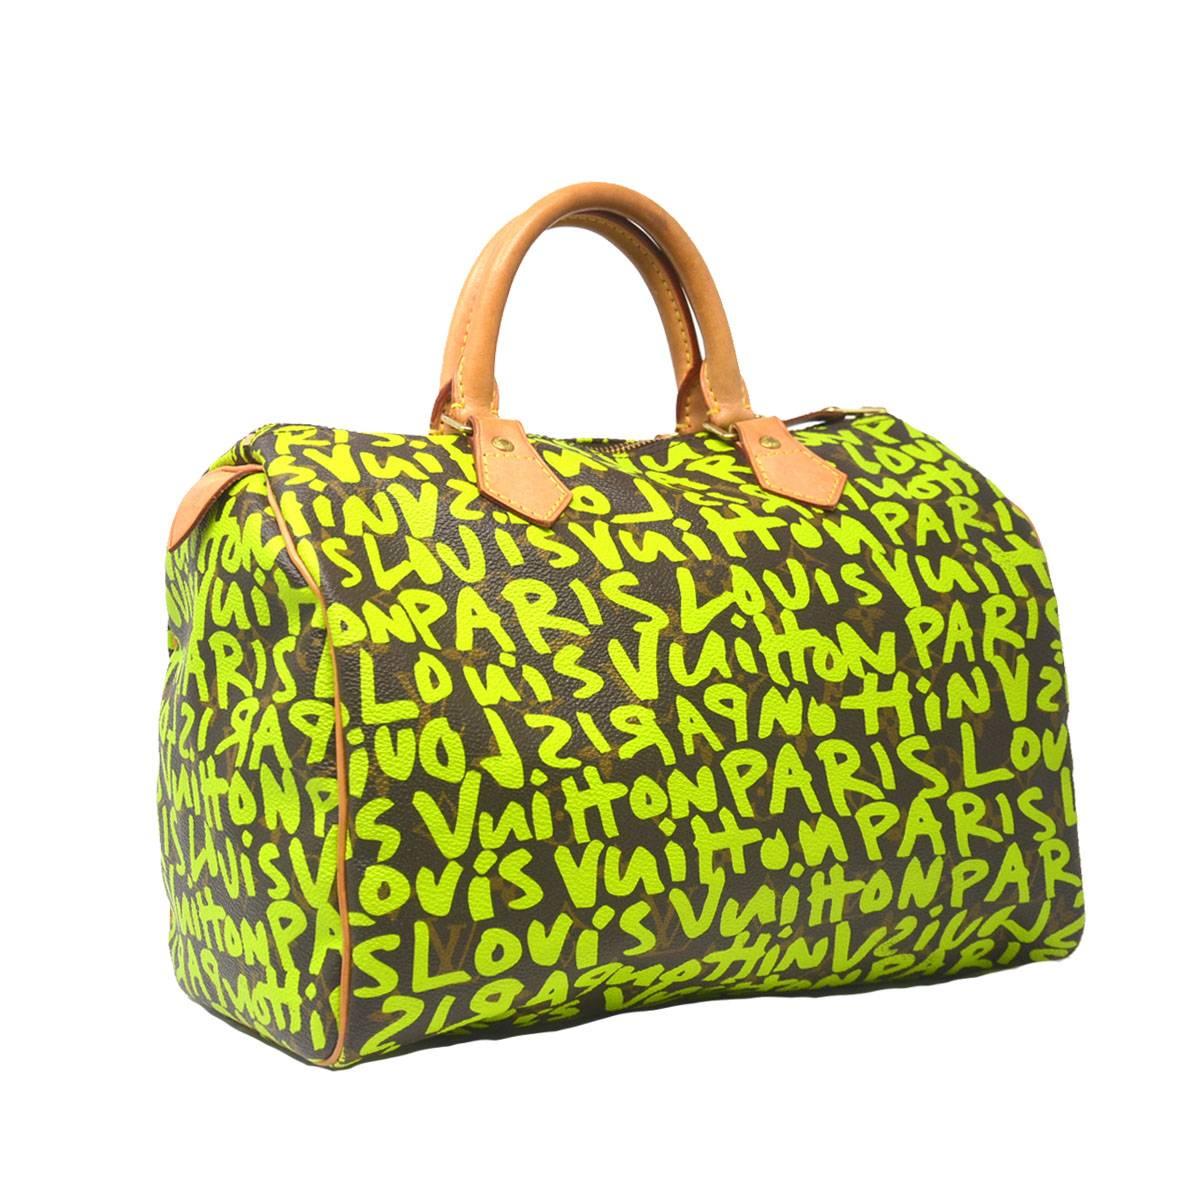 Company-Louis Vuitton
Model-Speedy 30 Stephen Sprouse Graffiti
Color-Neon Green
Date Code-TH5008
Material-Leather
Measurements-11.8